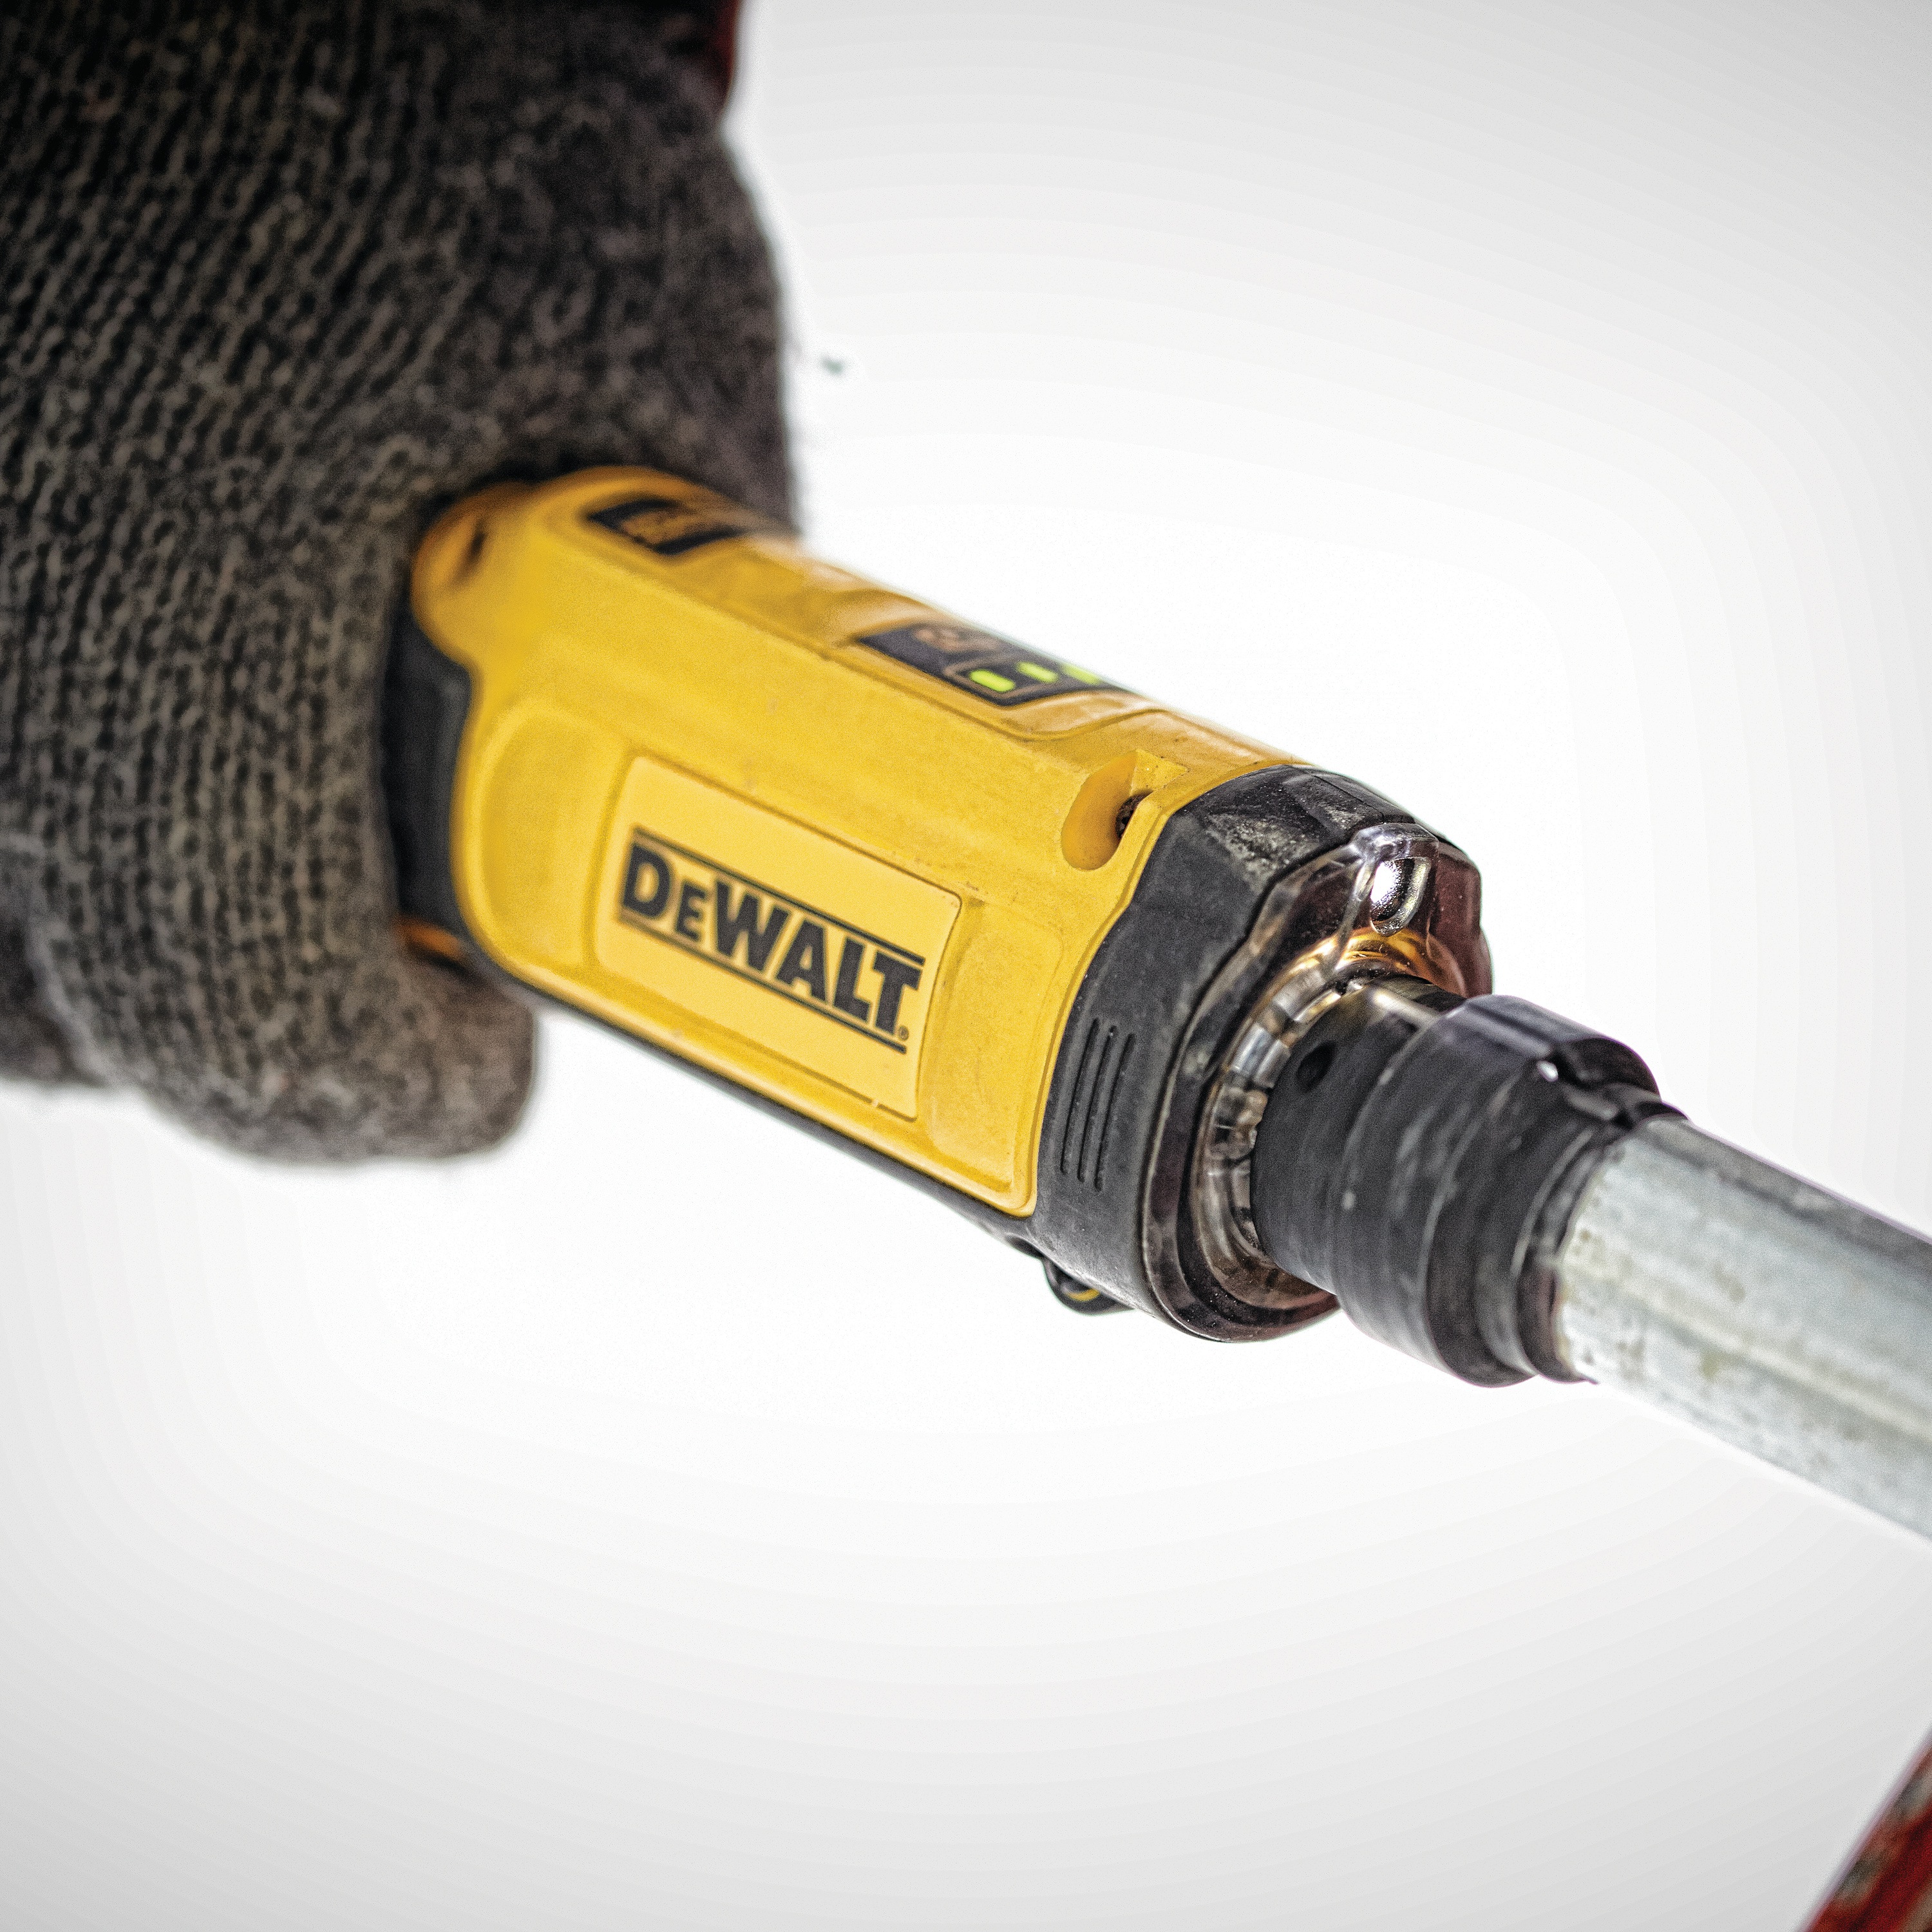 Gyroscopic screwdriver with conduit reamer being used on a pipe.